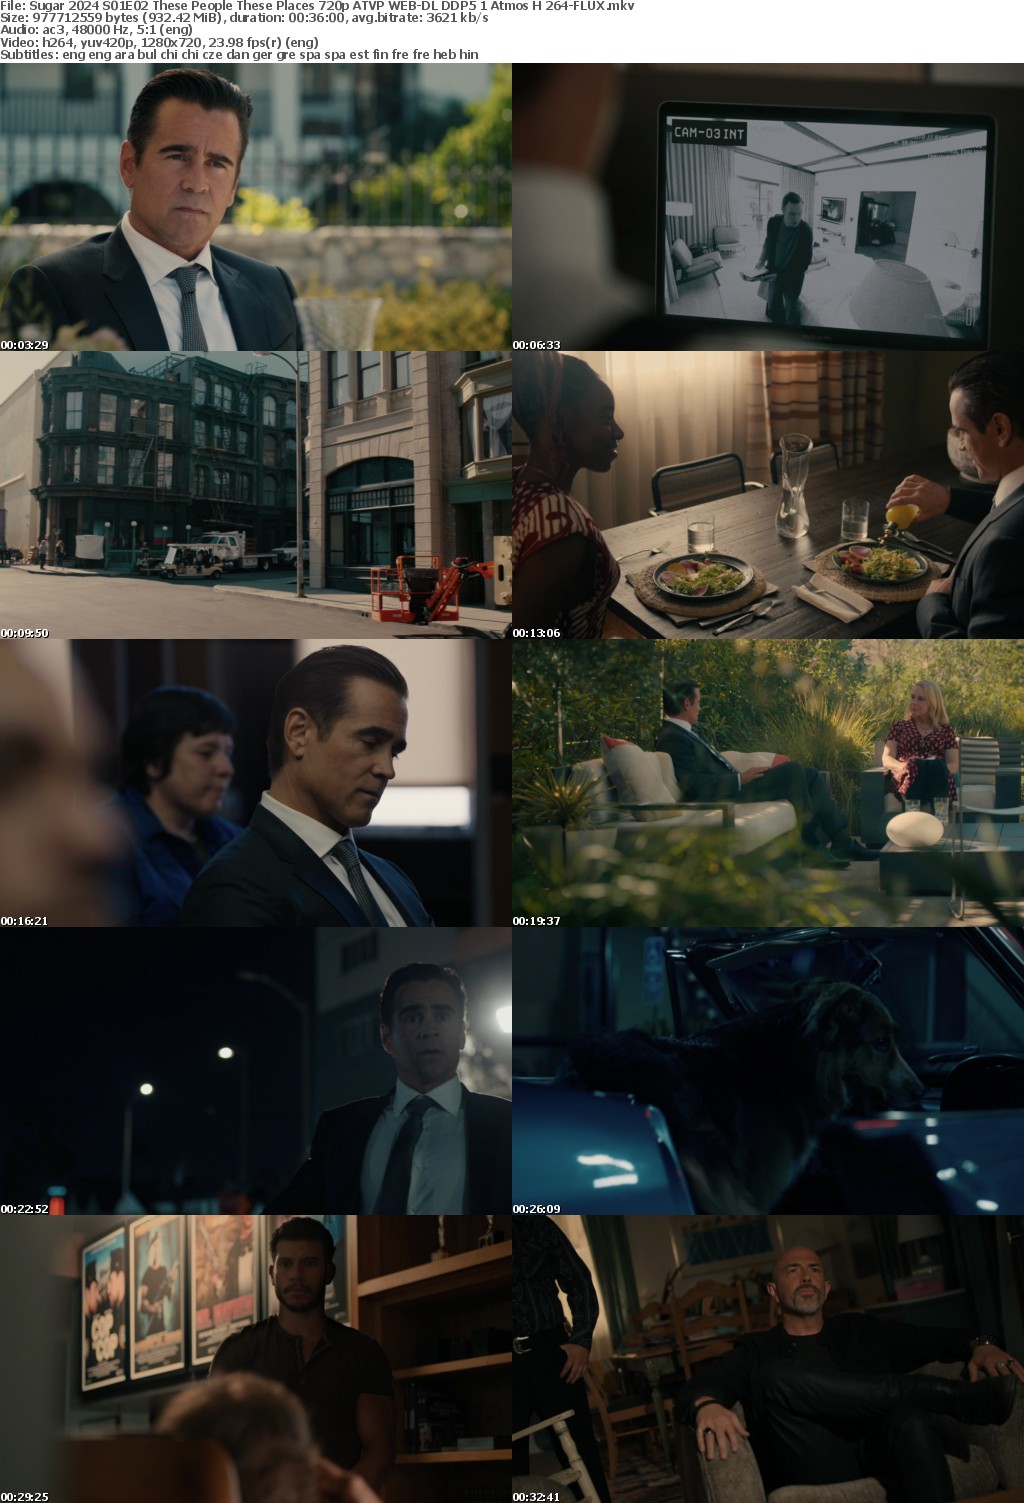 Sugar 2024 S01E02 These People These Places 720p ATVP WEB-DL DDP5 1 Atmos H 264-FLUX